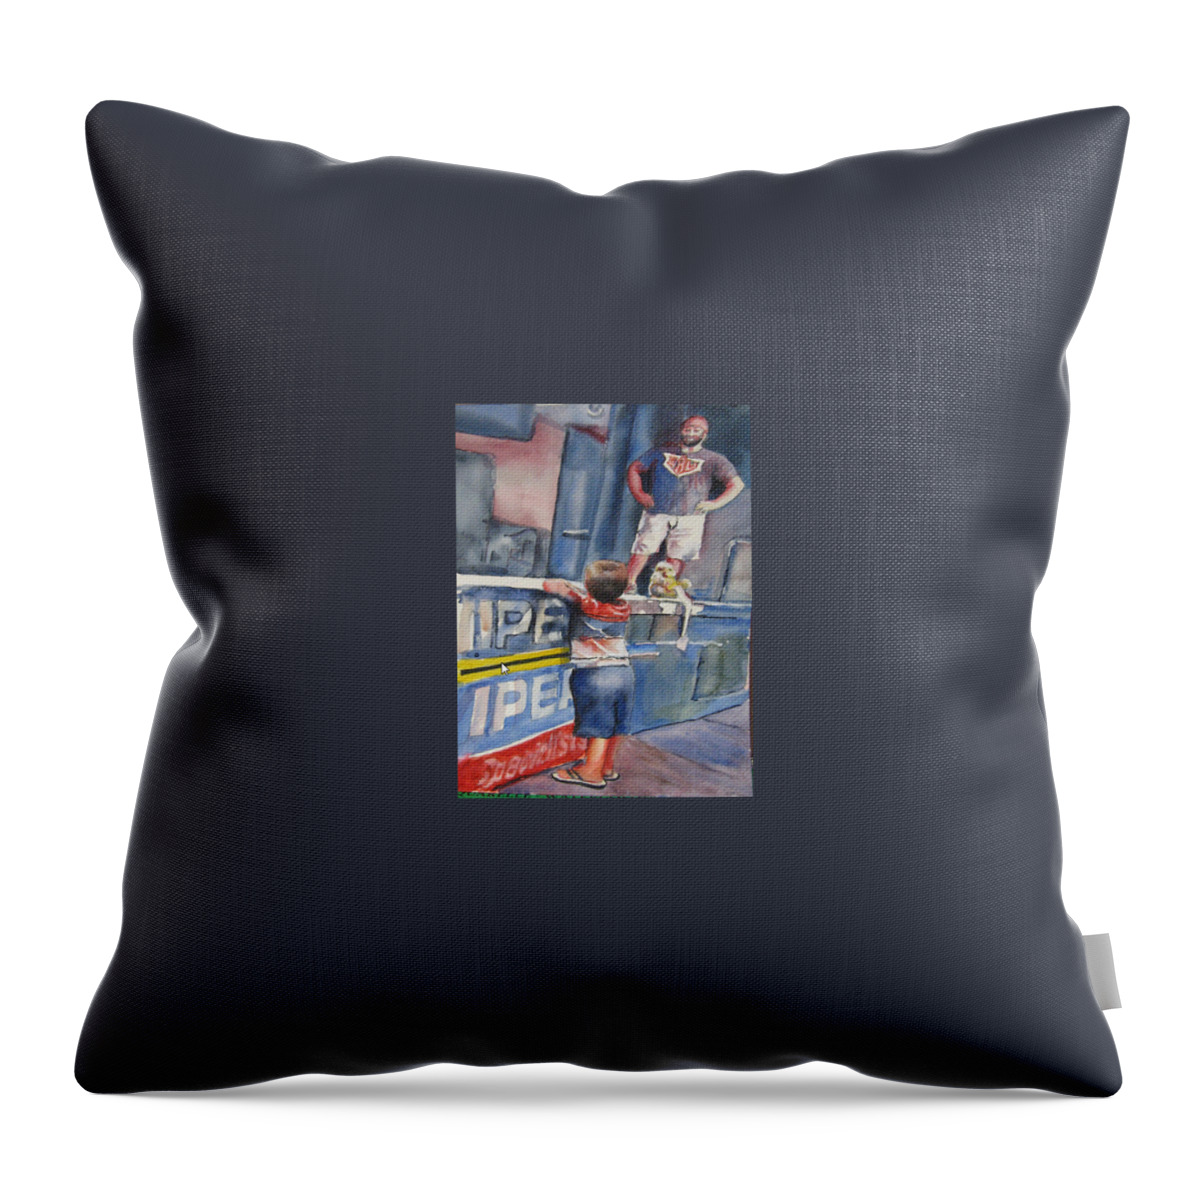  Throw Pillow featuring the painting My Hero by Bobby Walters